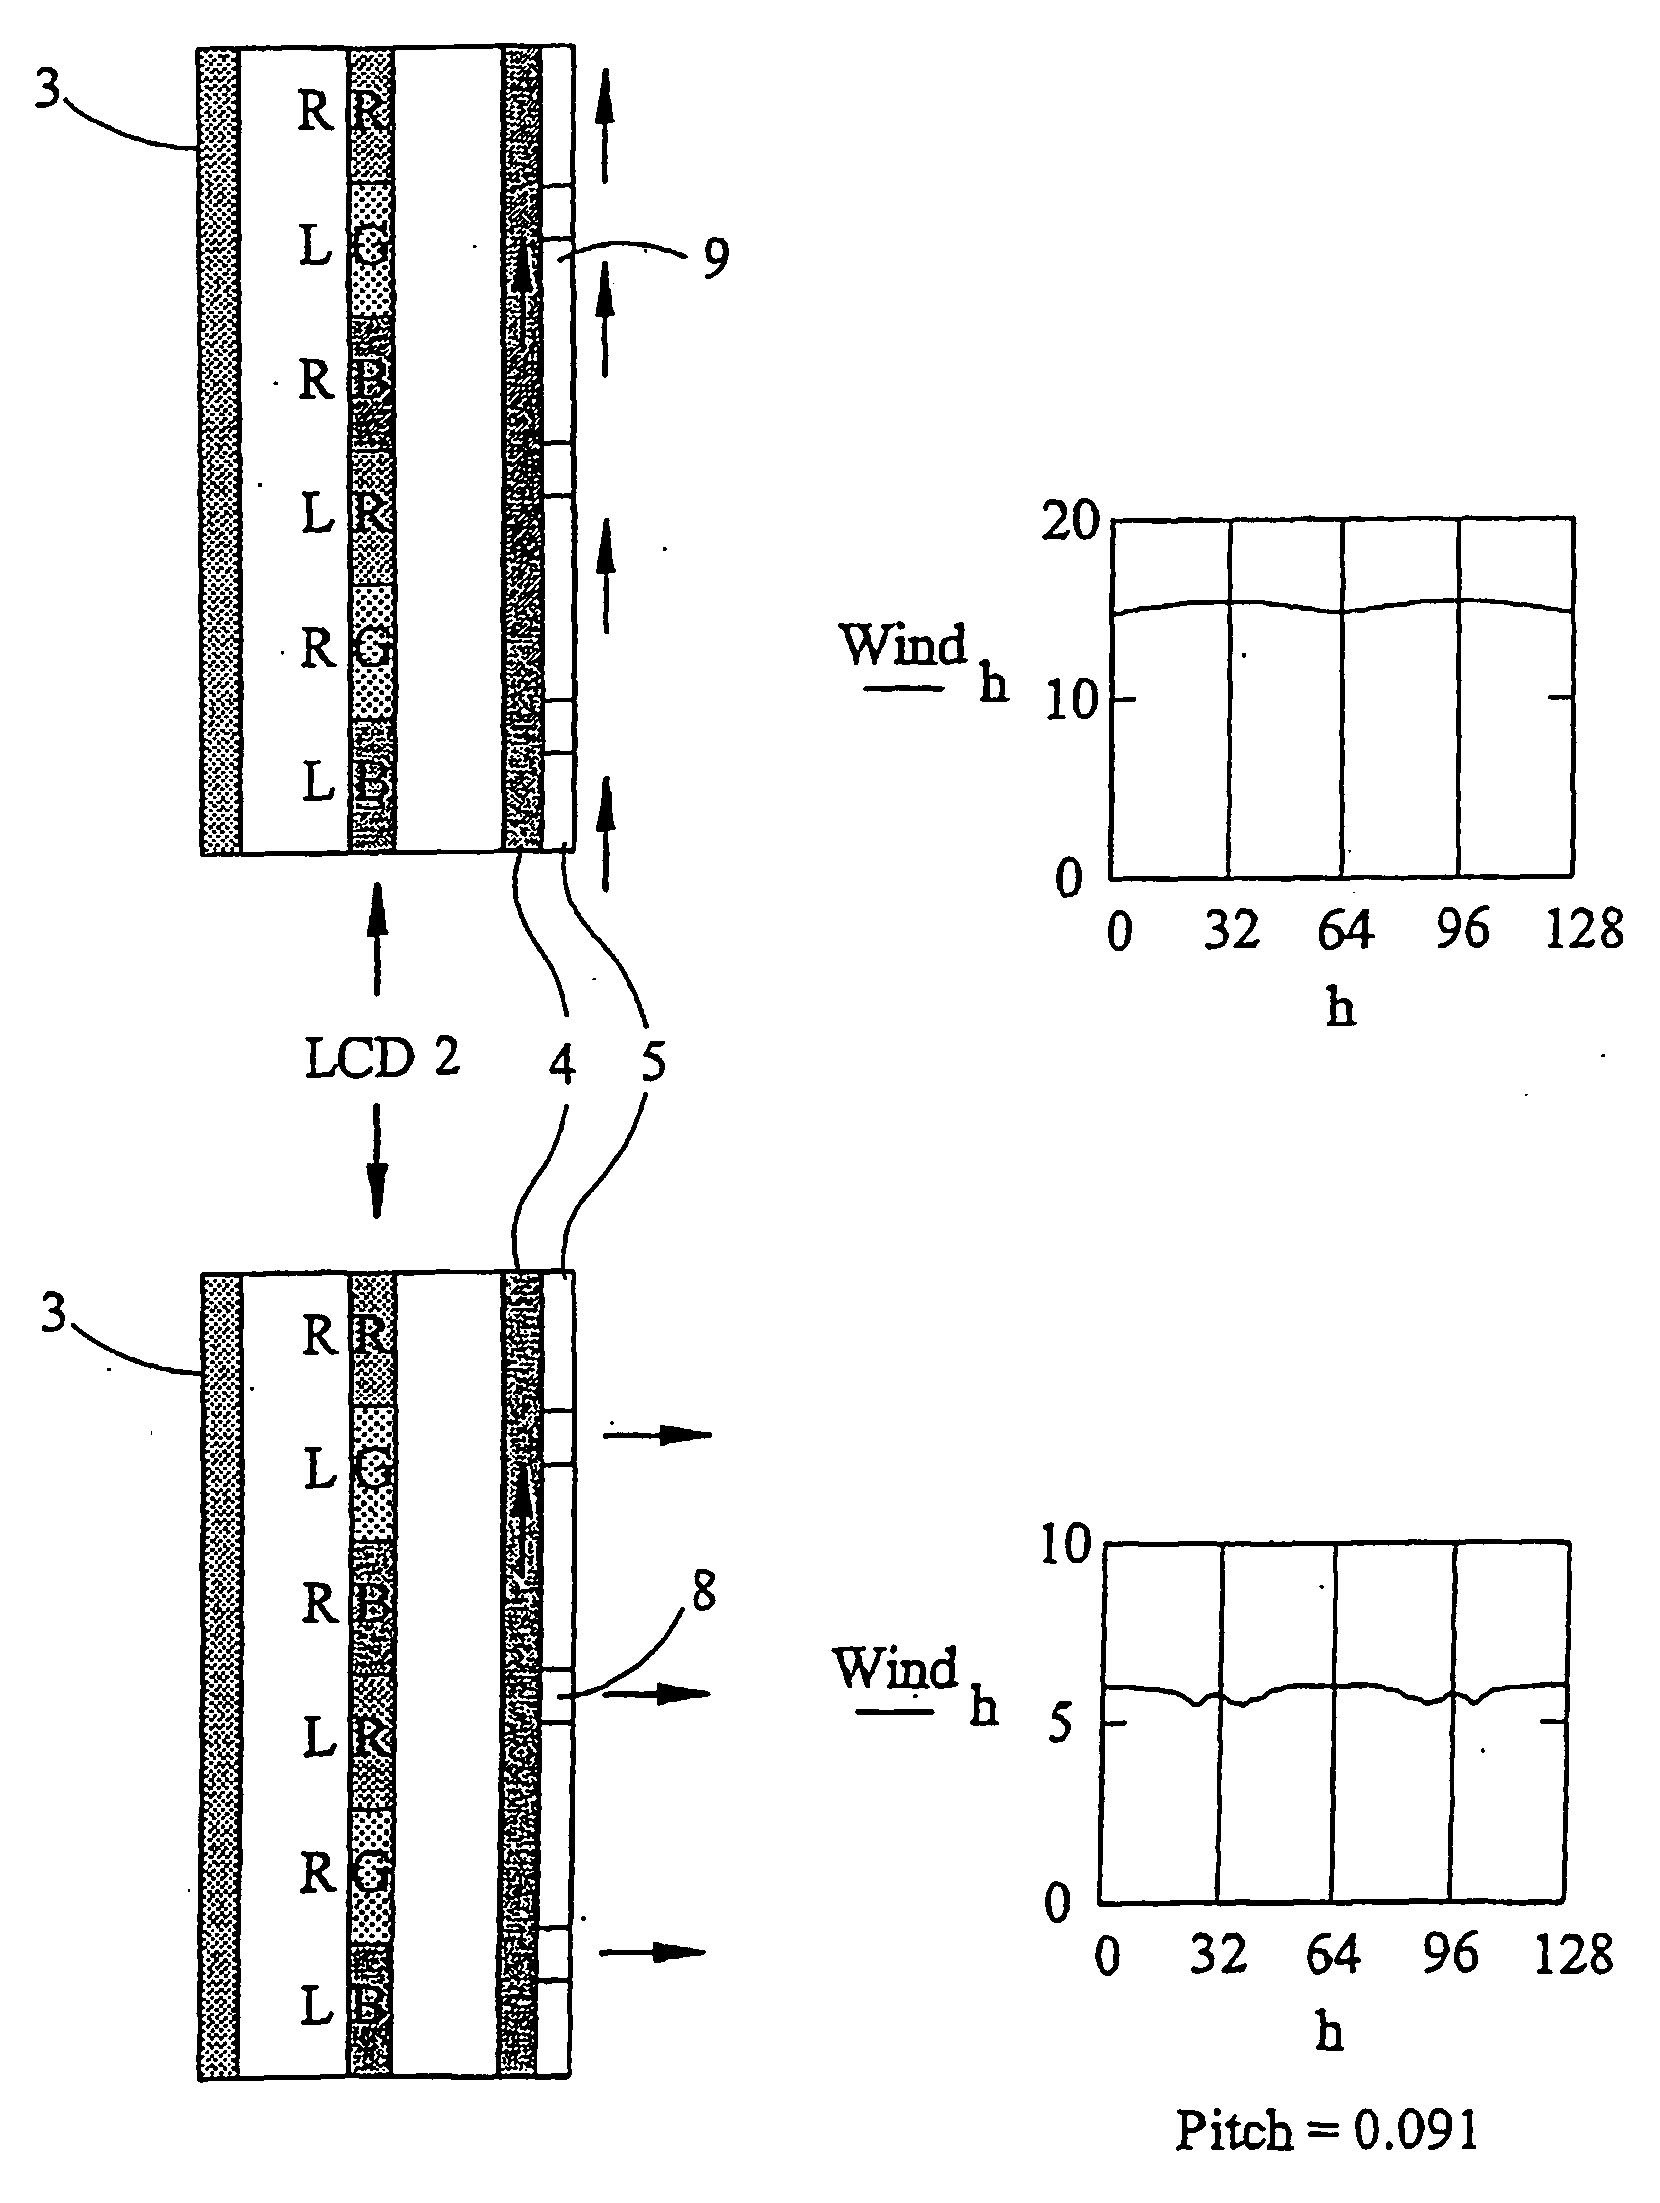 Optical device and display operating in two dimensional and autostereoscopic three dimensional modes